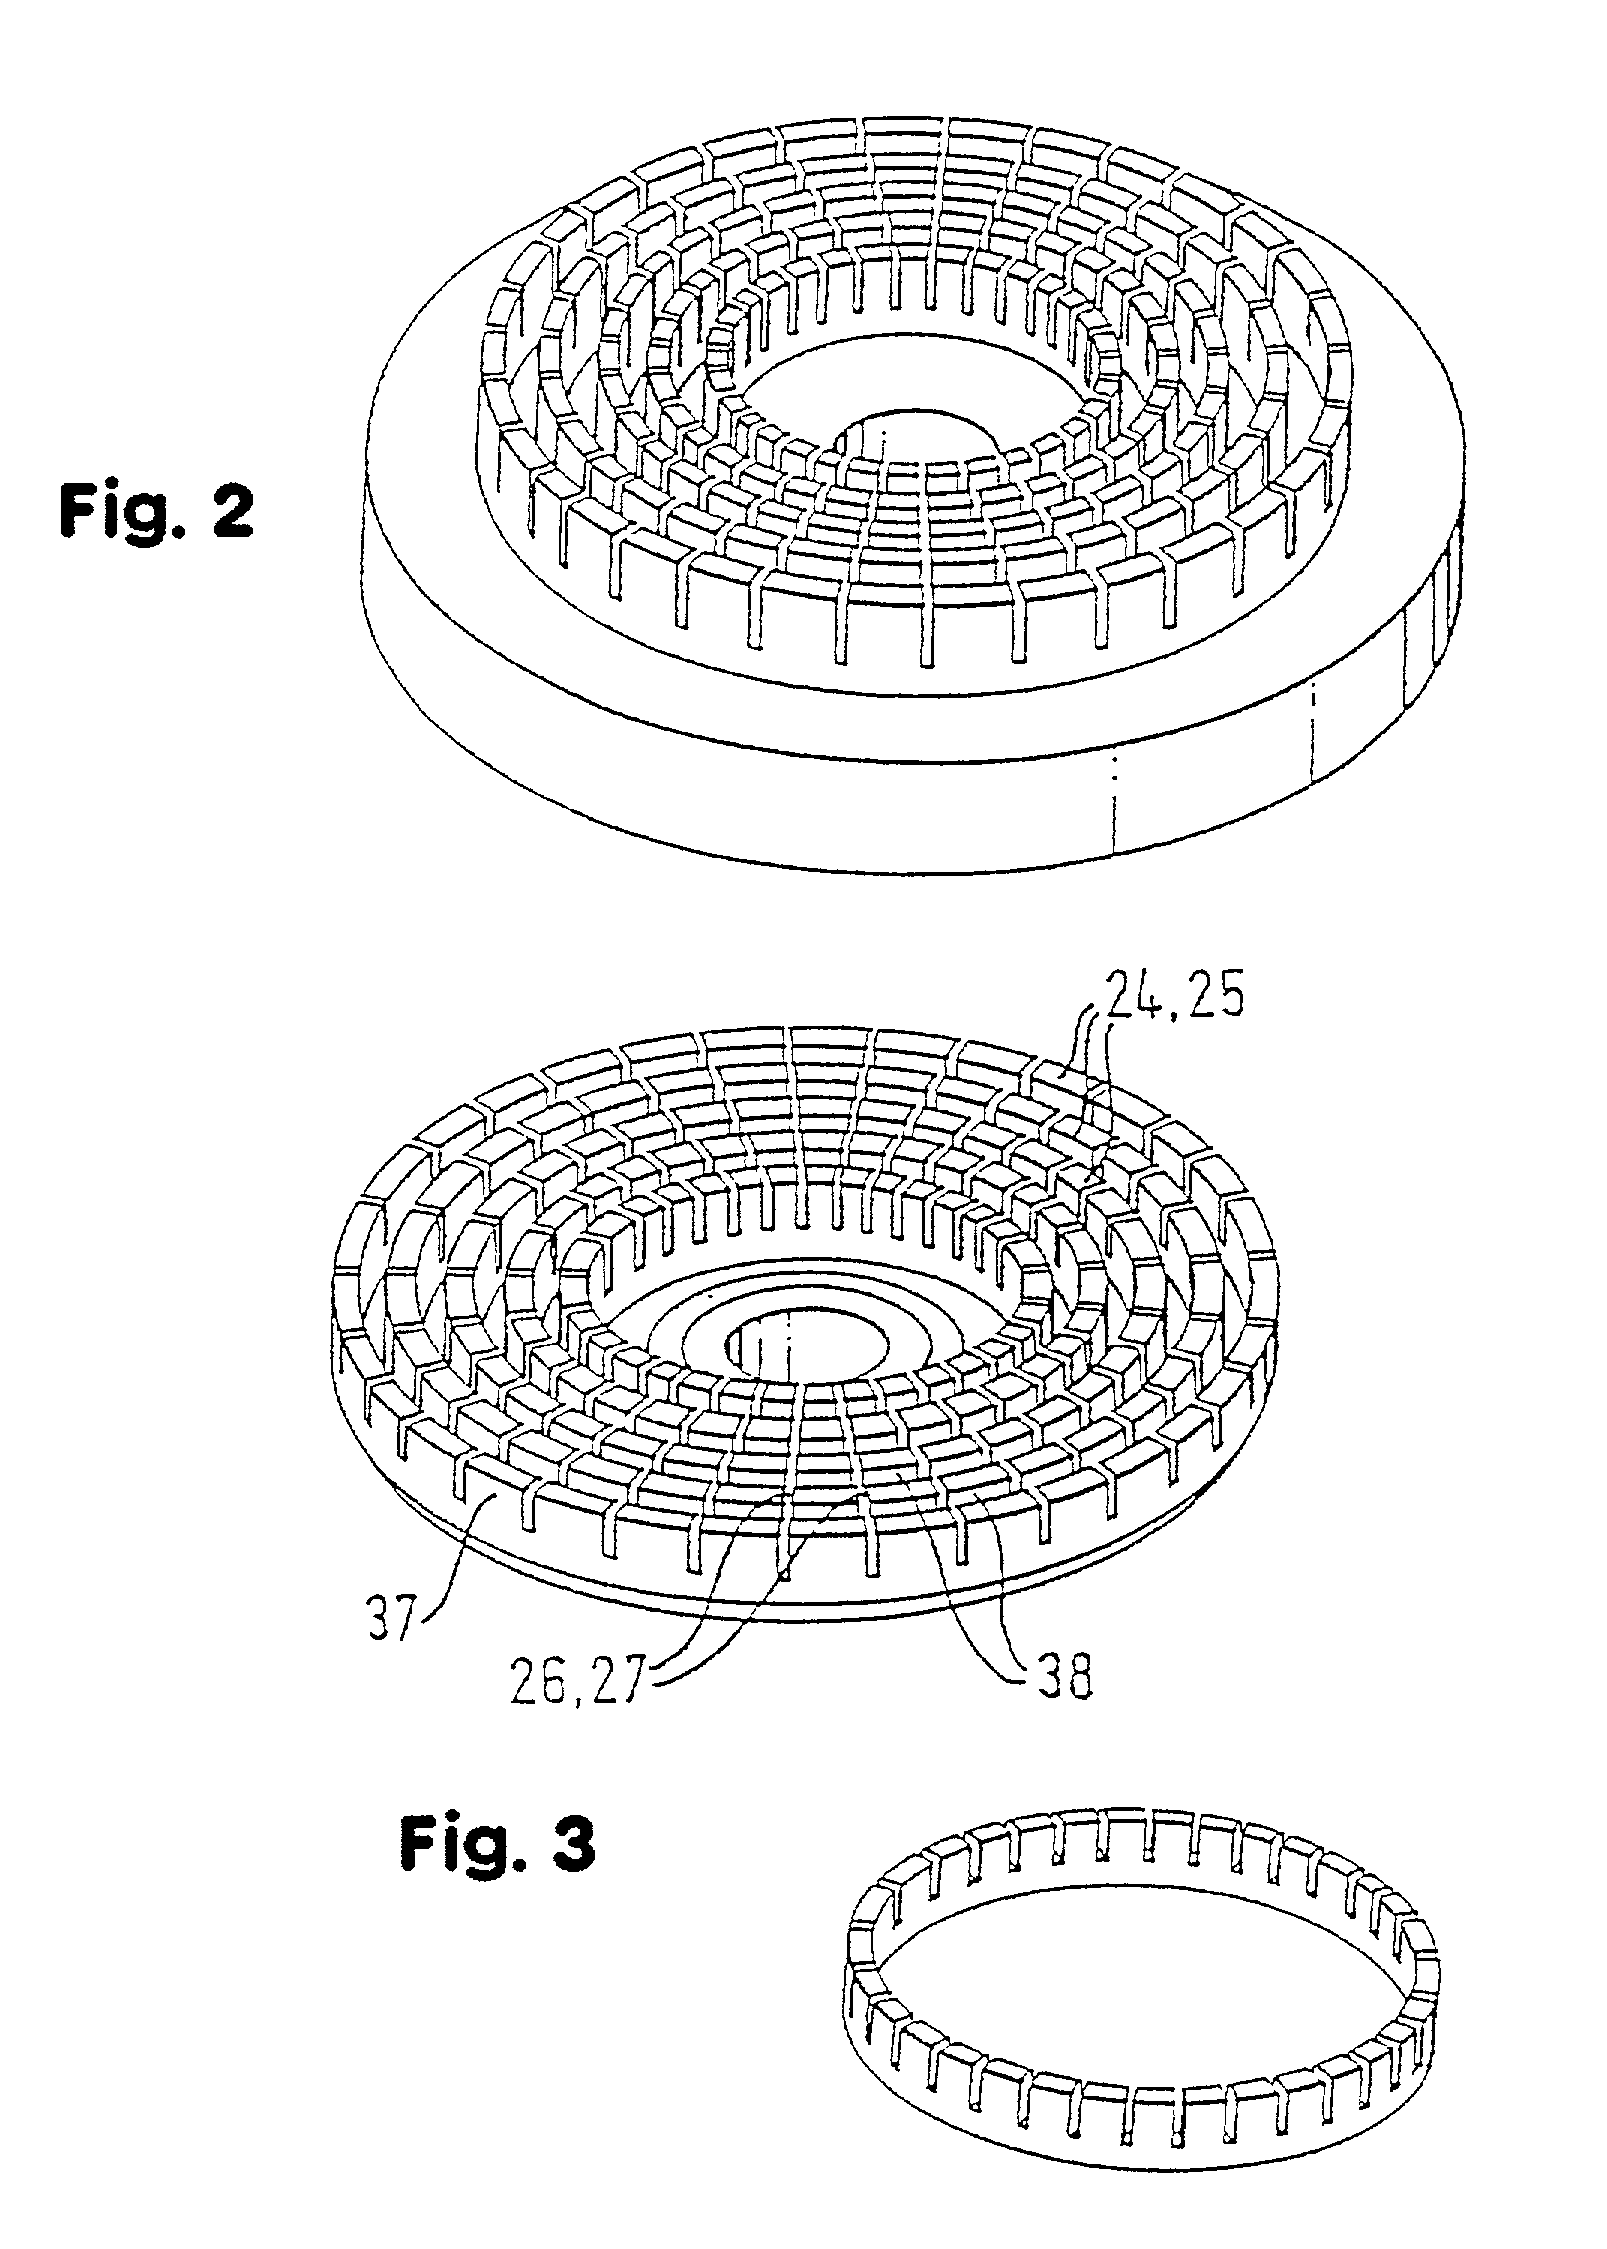 Apparatus having partially gold-plated surface